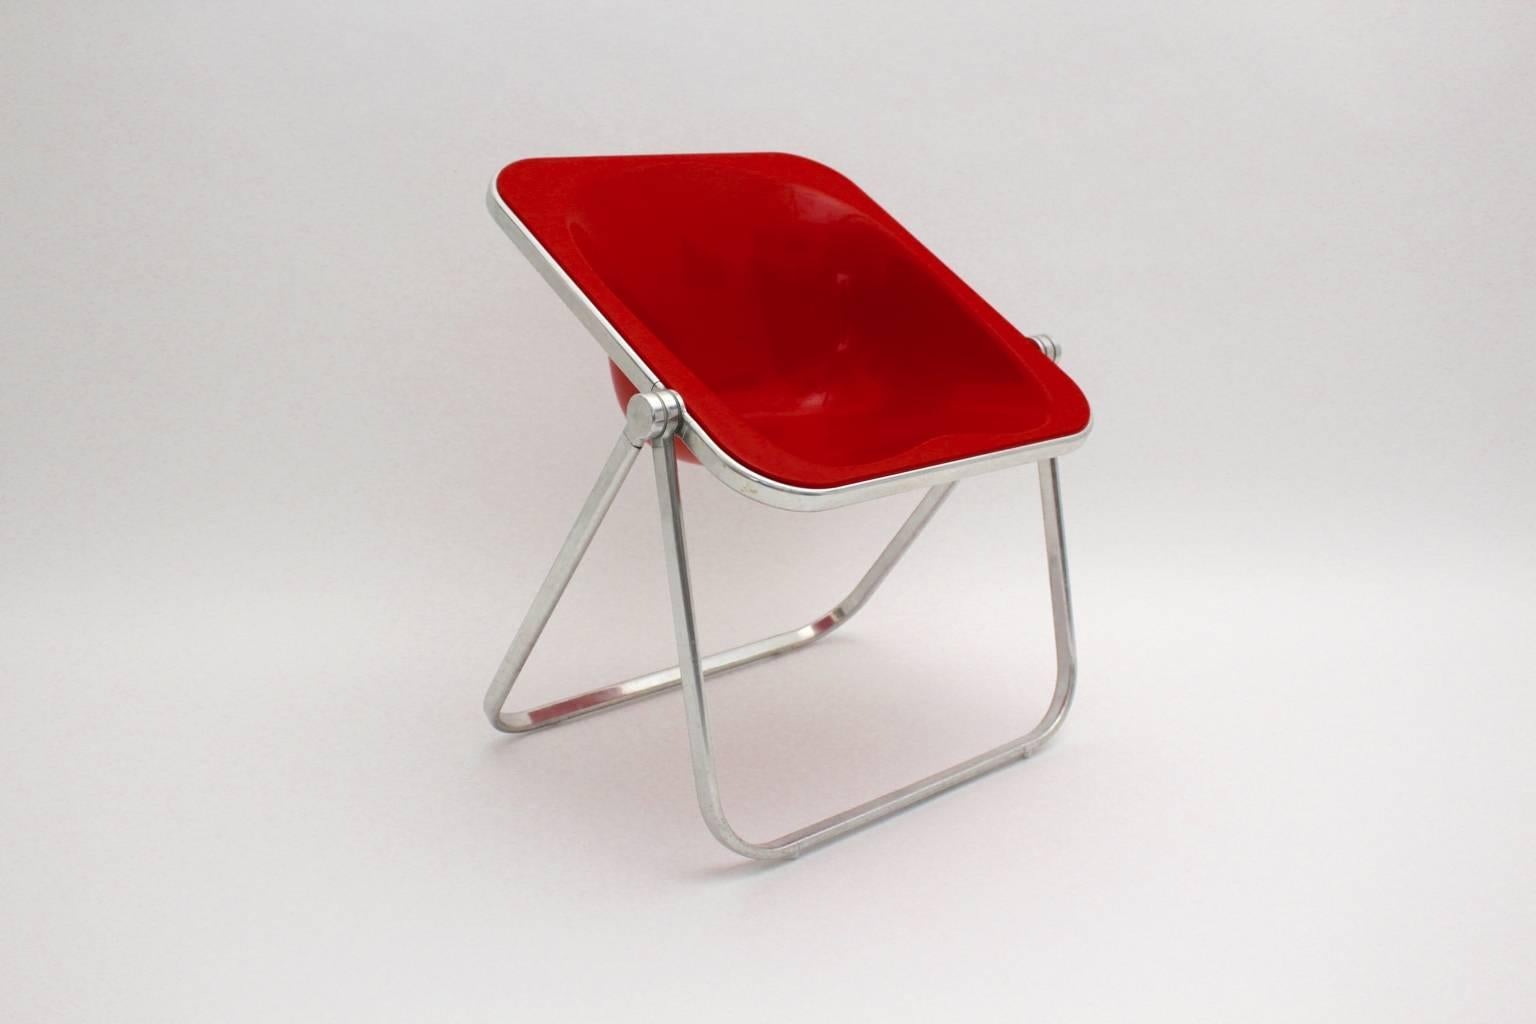 Giancarlo Piretti Space Age red foldable plastic vintage armchair which is executed by Castelli, Italy.
This joyful foldable chair model Plona in a powerful red color comes from an early production and shows very good condition with minor scratches